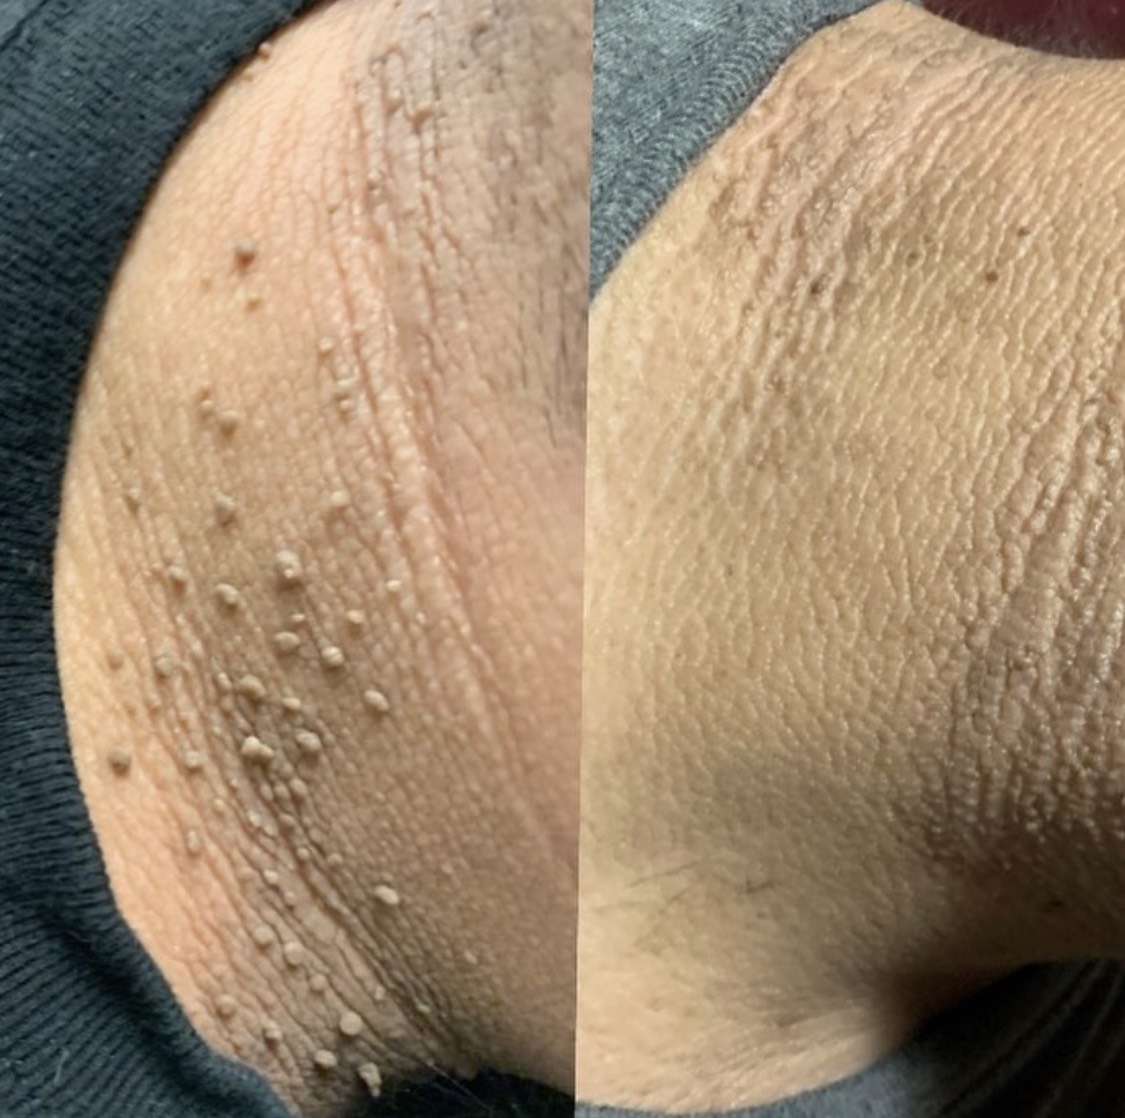 Skin tag removal on pigmented skin is best done with Plexr Plasma